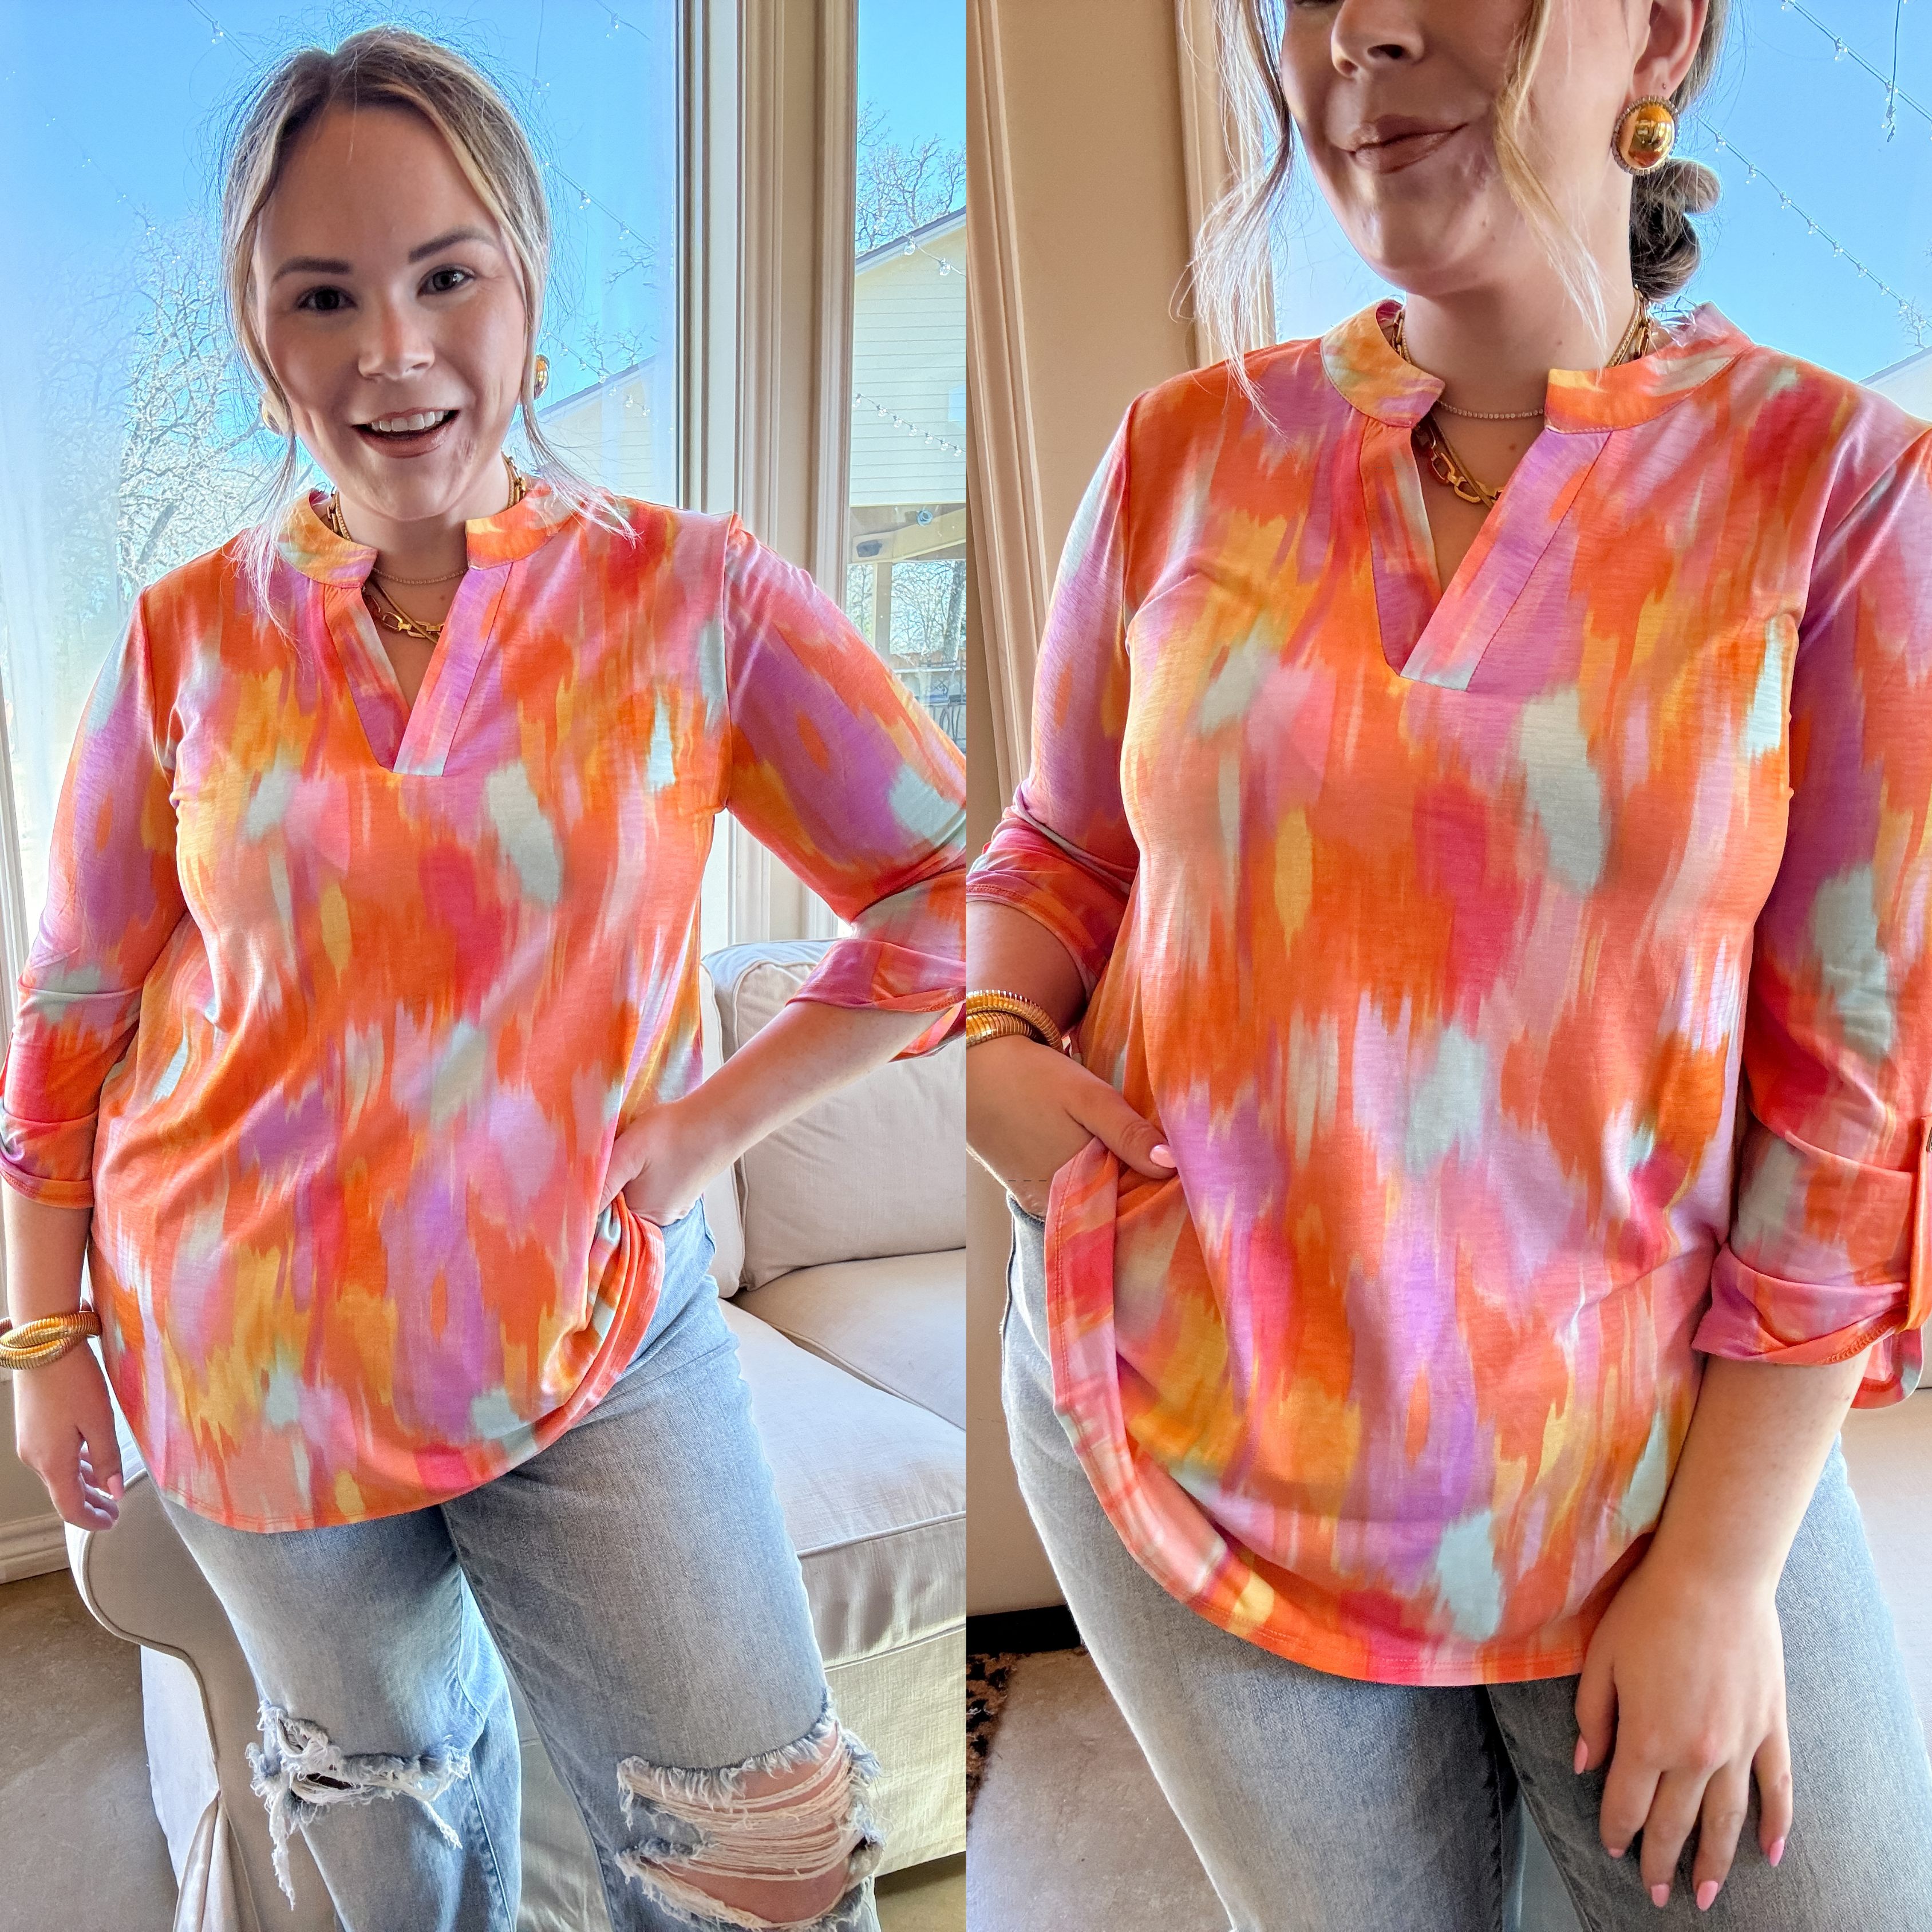 Urban Elegance Watercolor 3/4 Sleeve Tunic Top in Orange Mix - Giddy Up Glamour Boutique